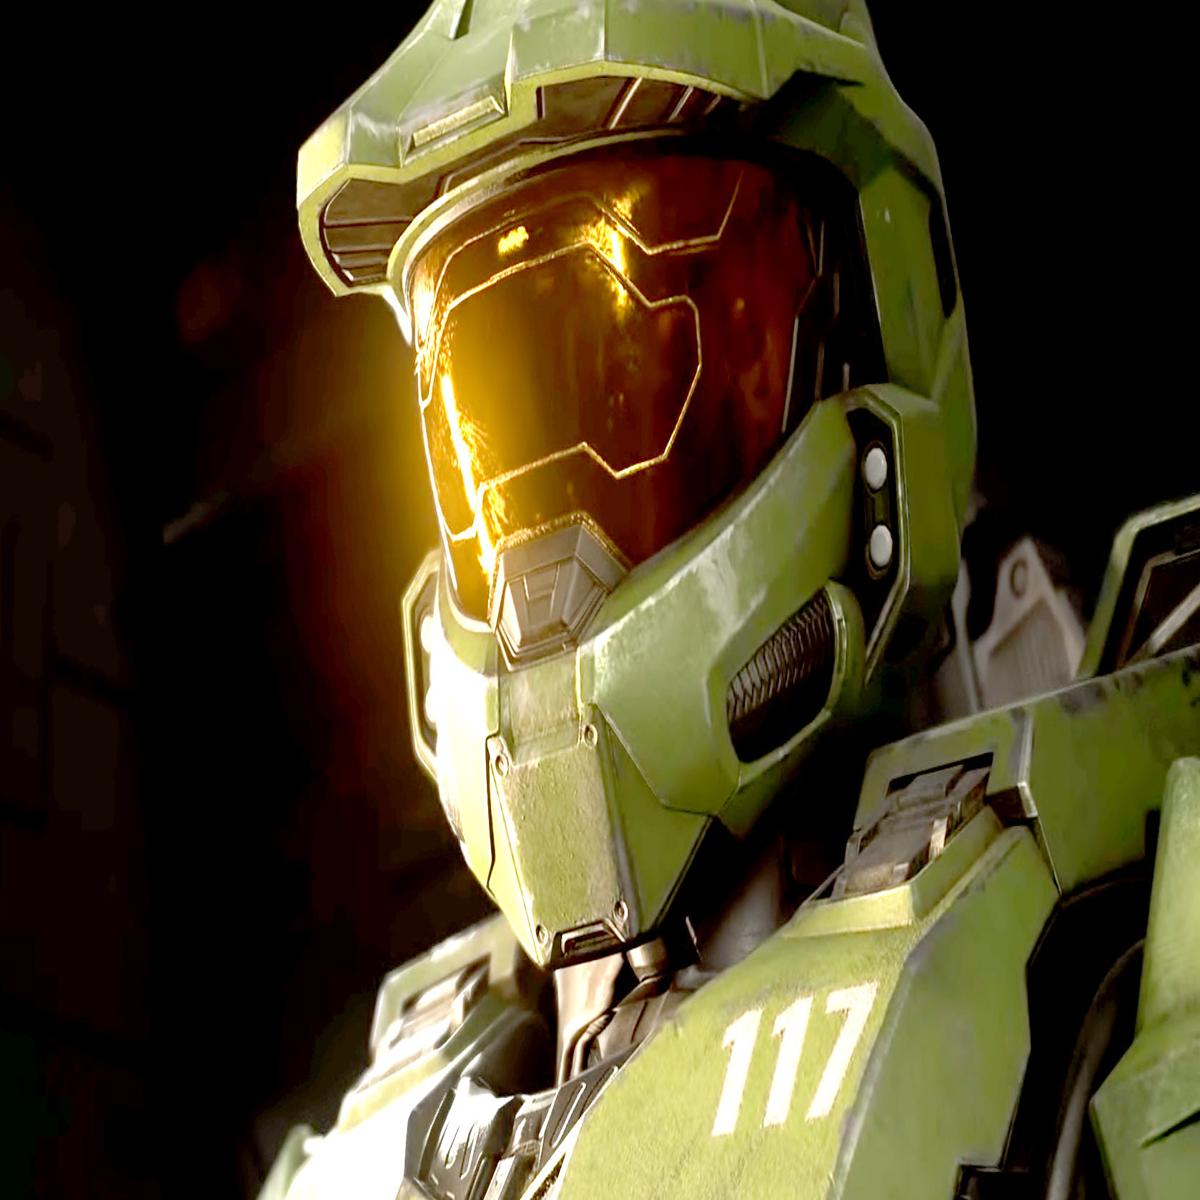 Halo' TV show is a chance to add complexity to the video game's